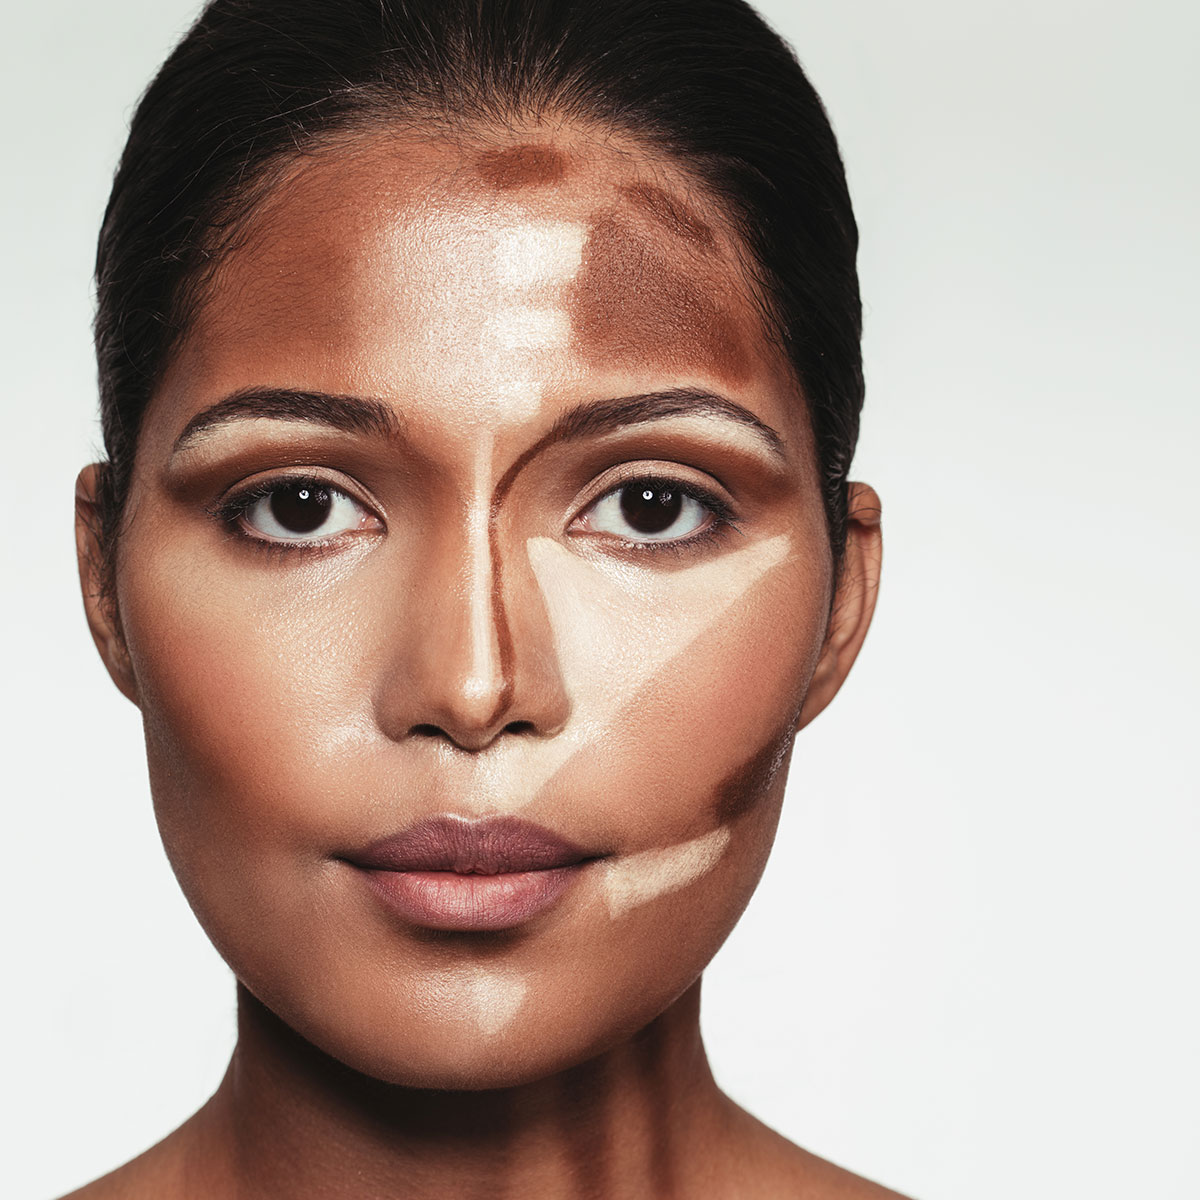 woman about to blend makeup for contour effect